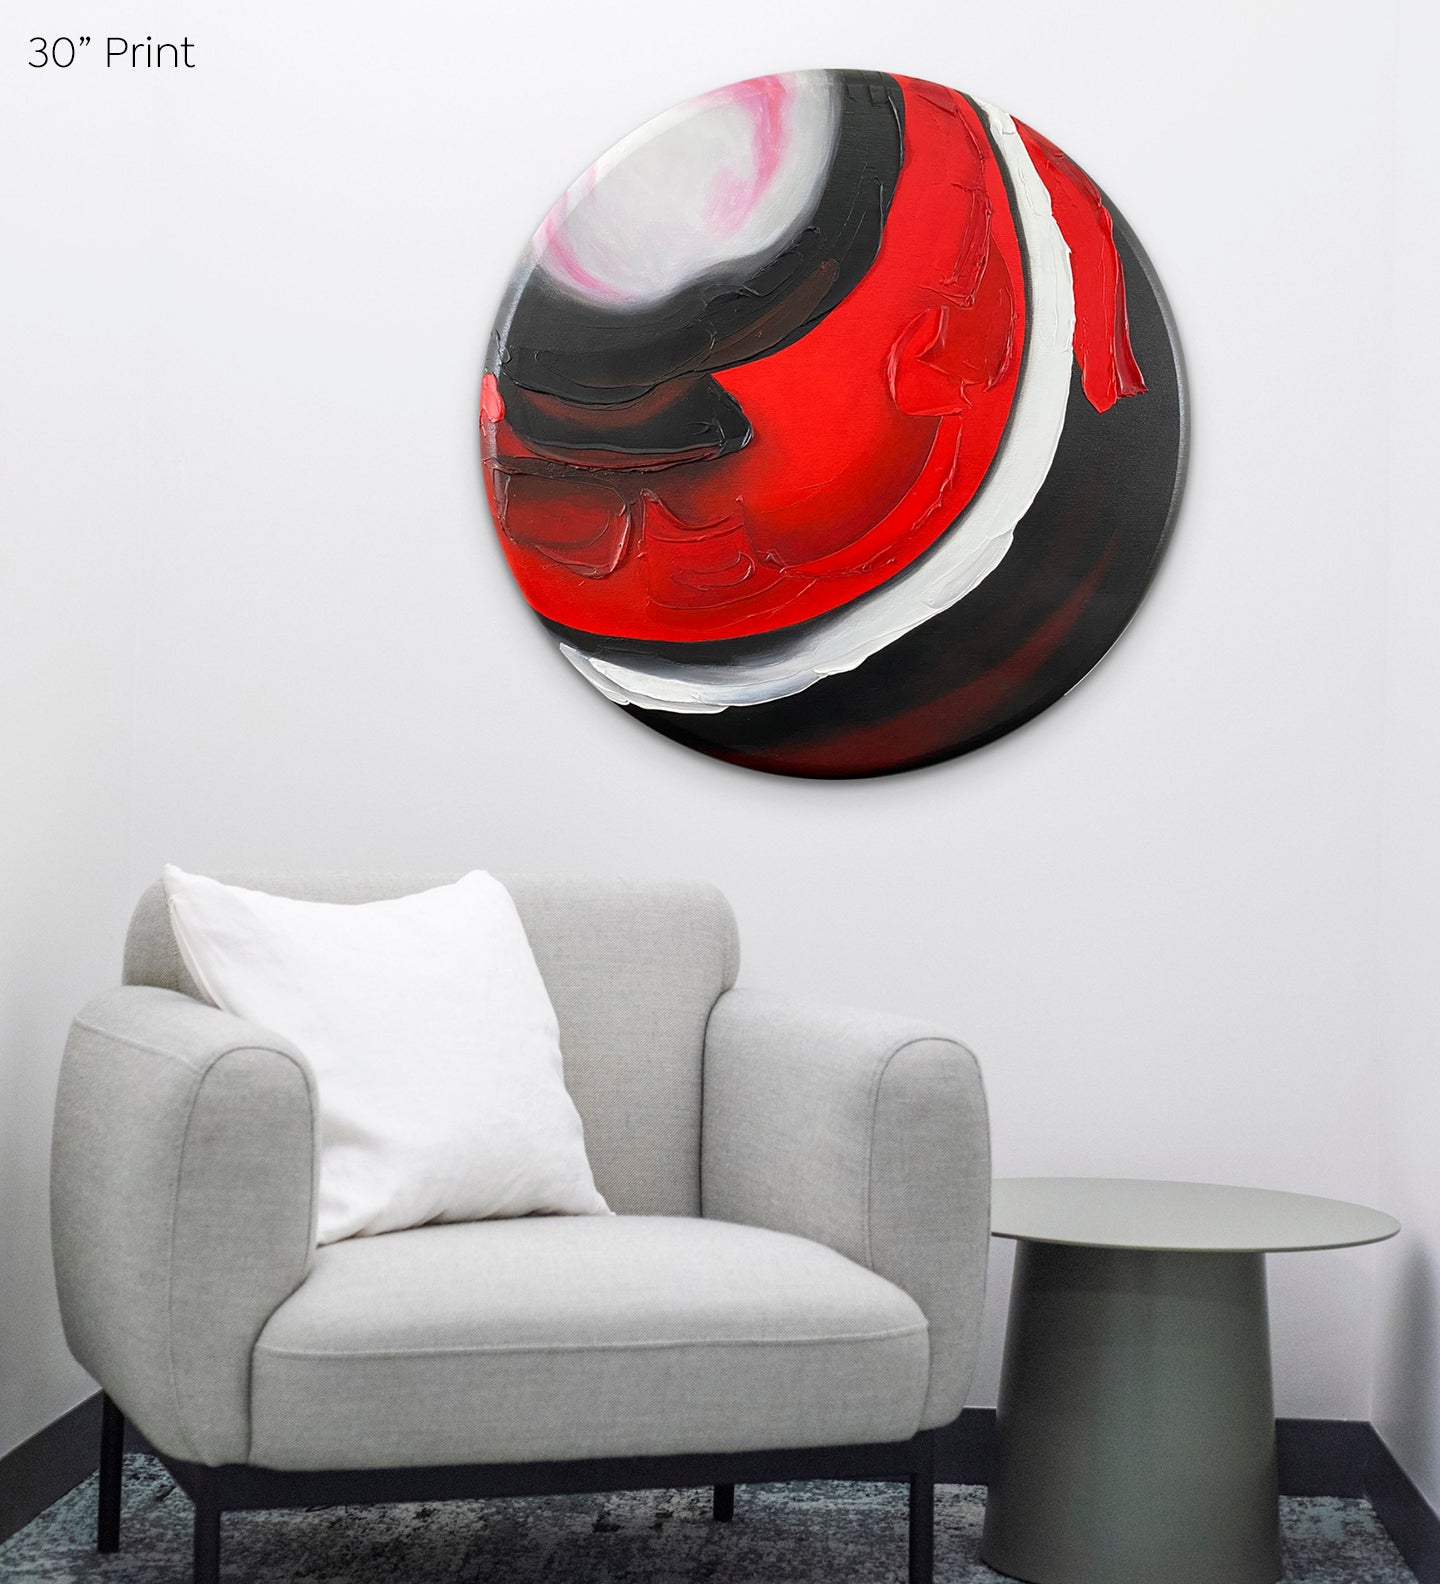 Abstract, acrylic and mixed-media 30” print on a round canvas with curved-edges shown on a light living room wall above a grey chair